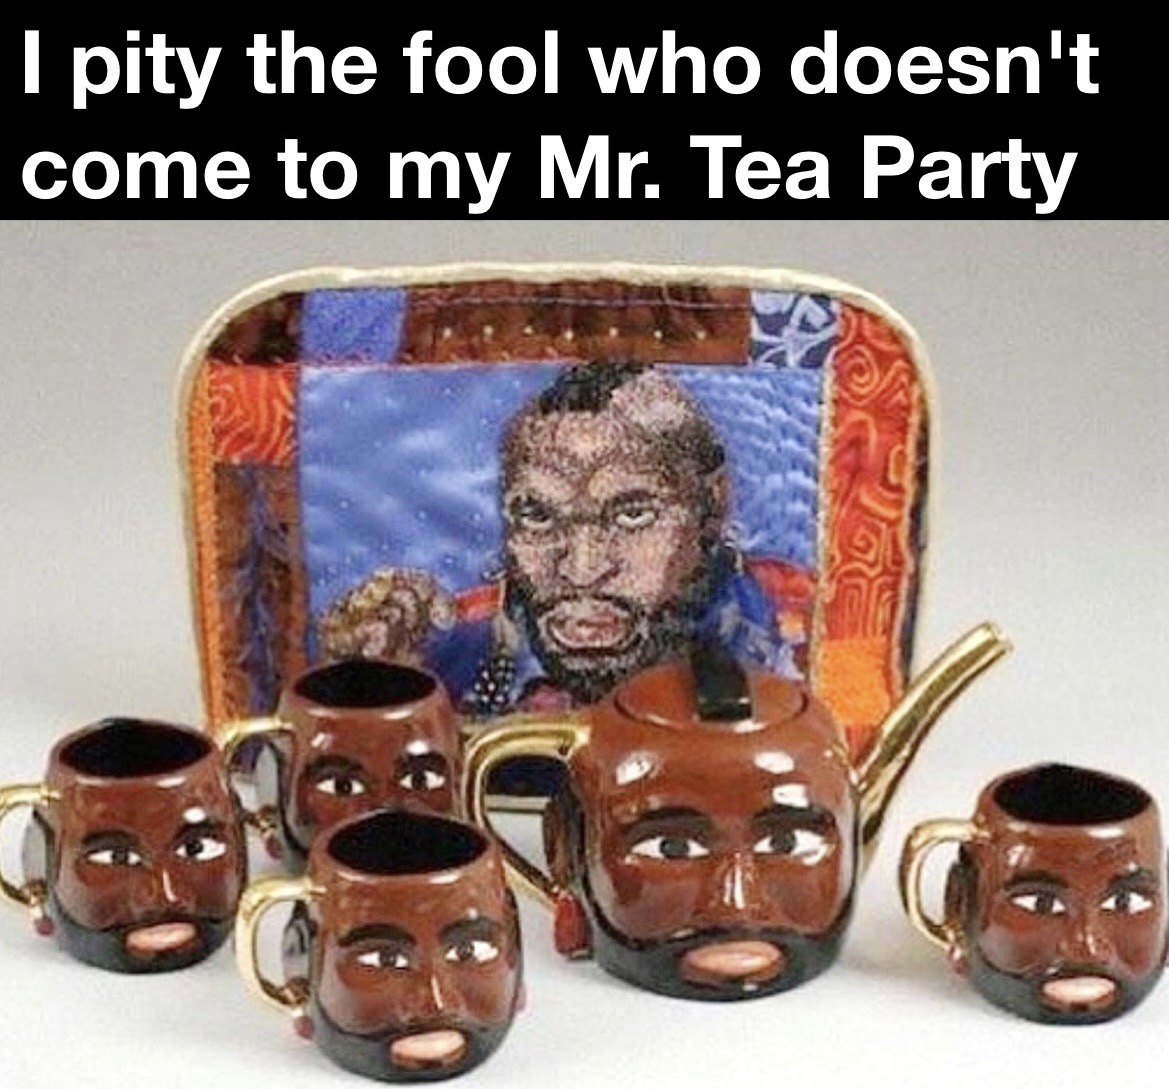 funny memes -  mr t pot - I pity the fool who doesn't come to my Mr. Tea Party